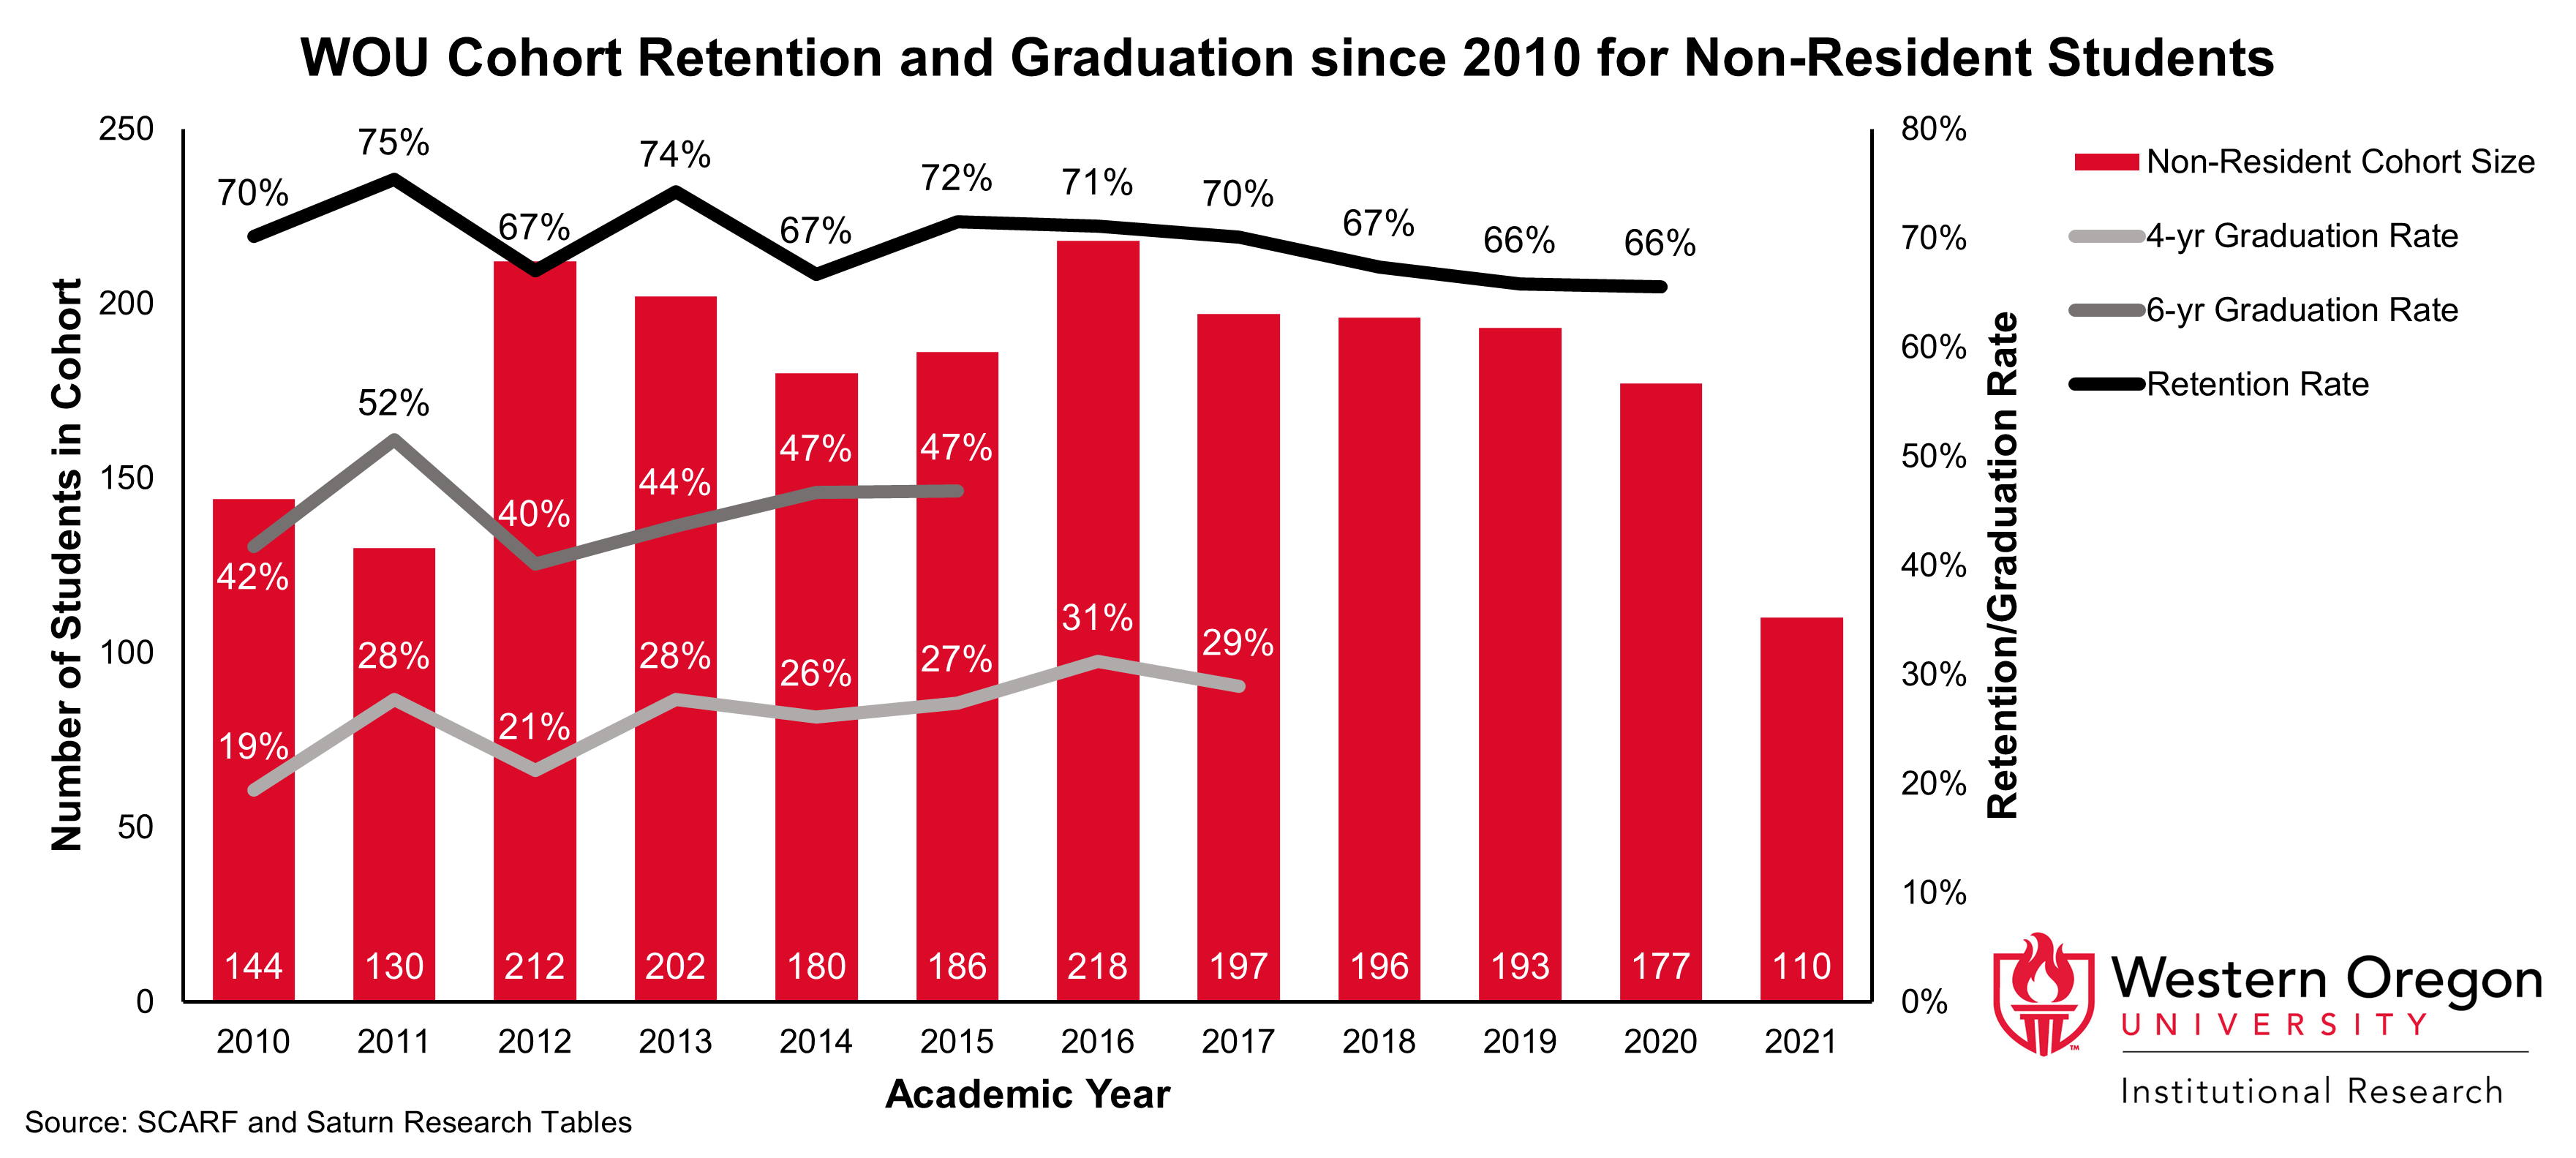 Bar and line graph of retention and 4- and 6-year graduation rates since 2010 for WOU students that have non-residency status, showing that graduation rates have been steadily increasing while retention rates have remained largely stable